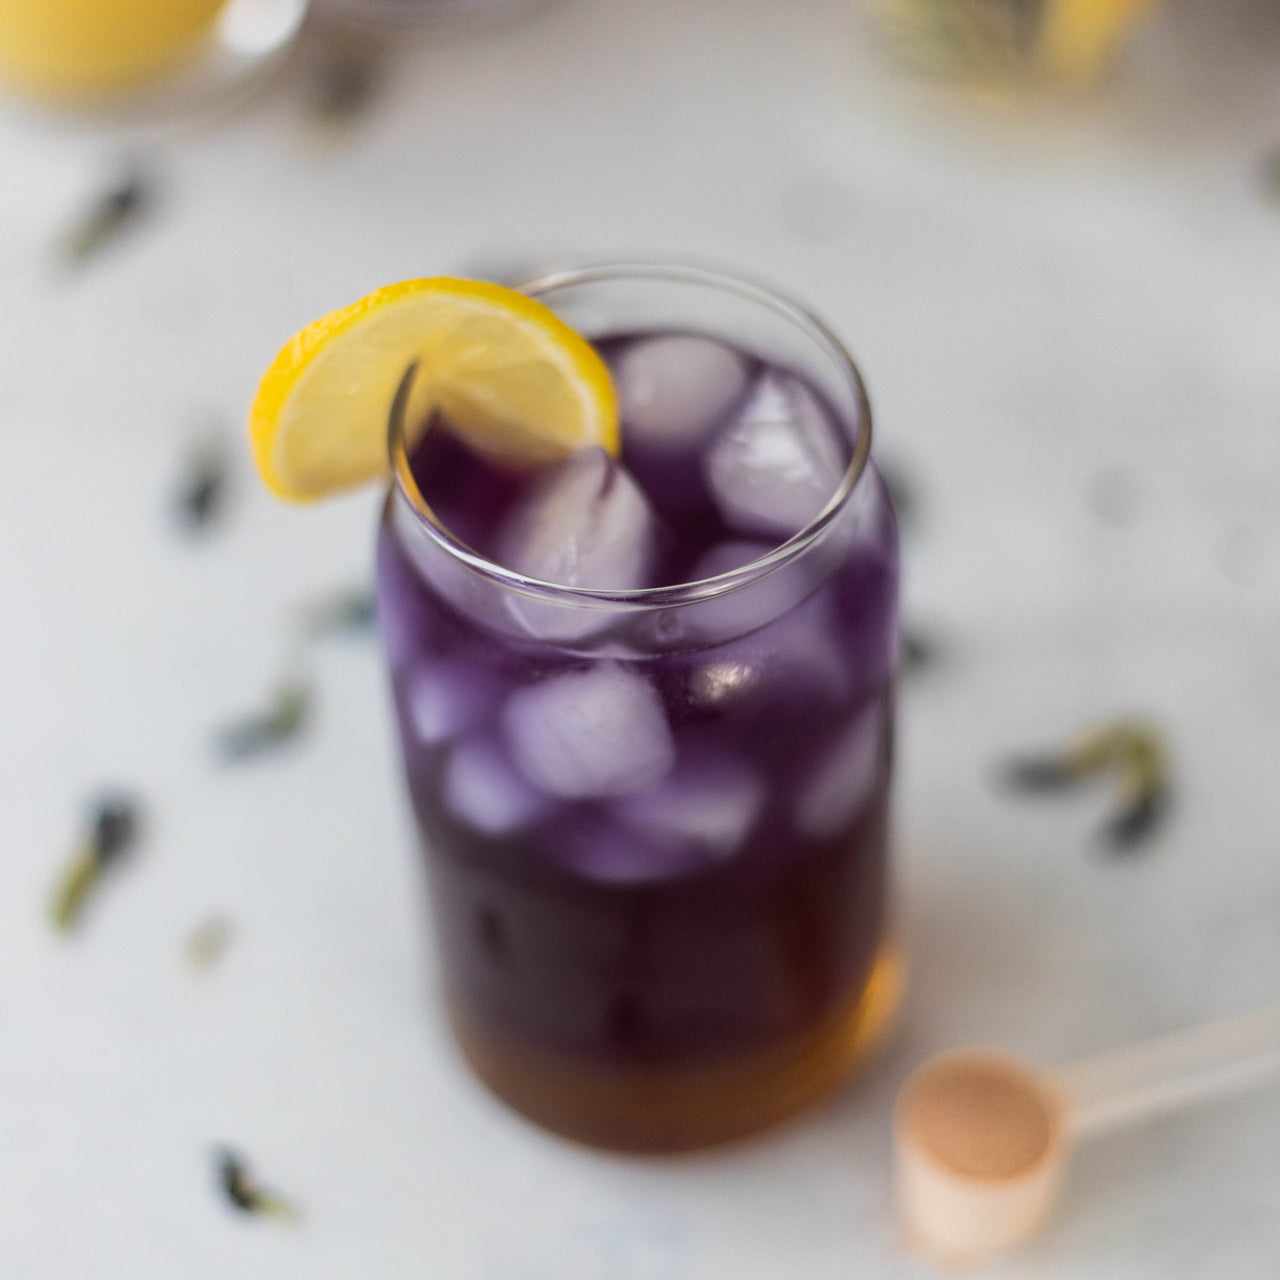 Butterfly Pea Tea Spritz in glass with lemon wedge